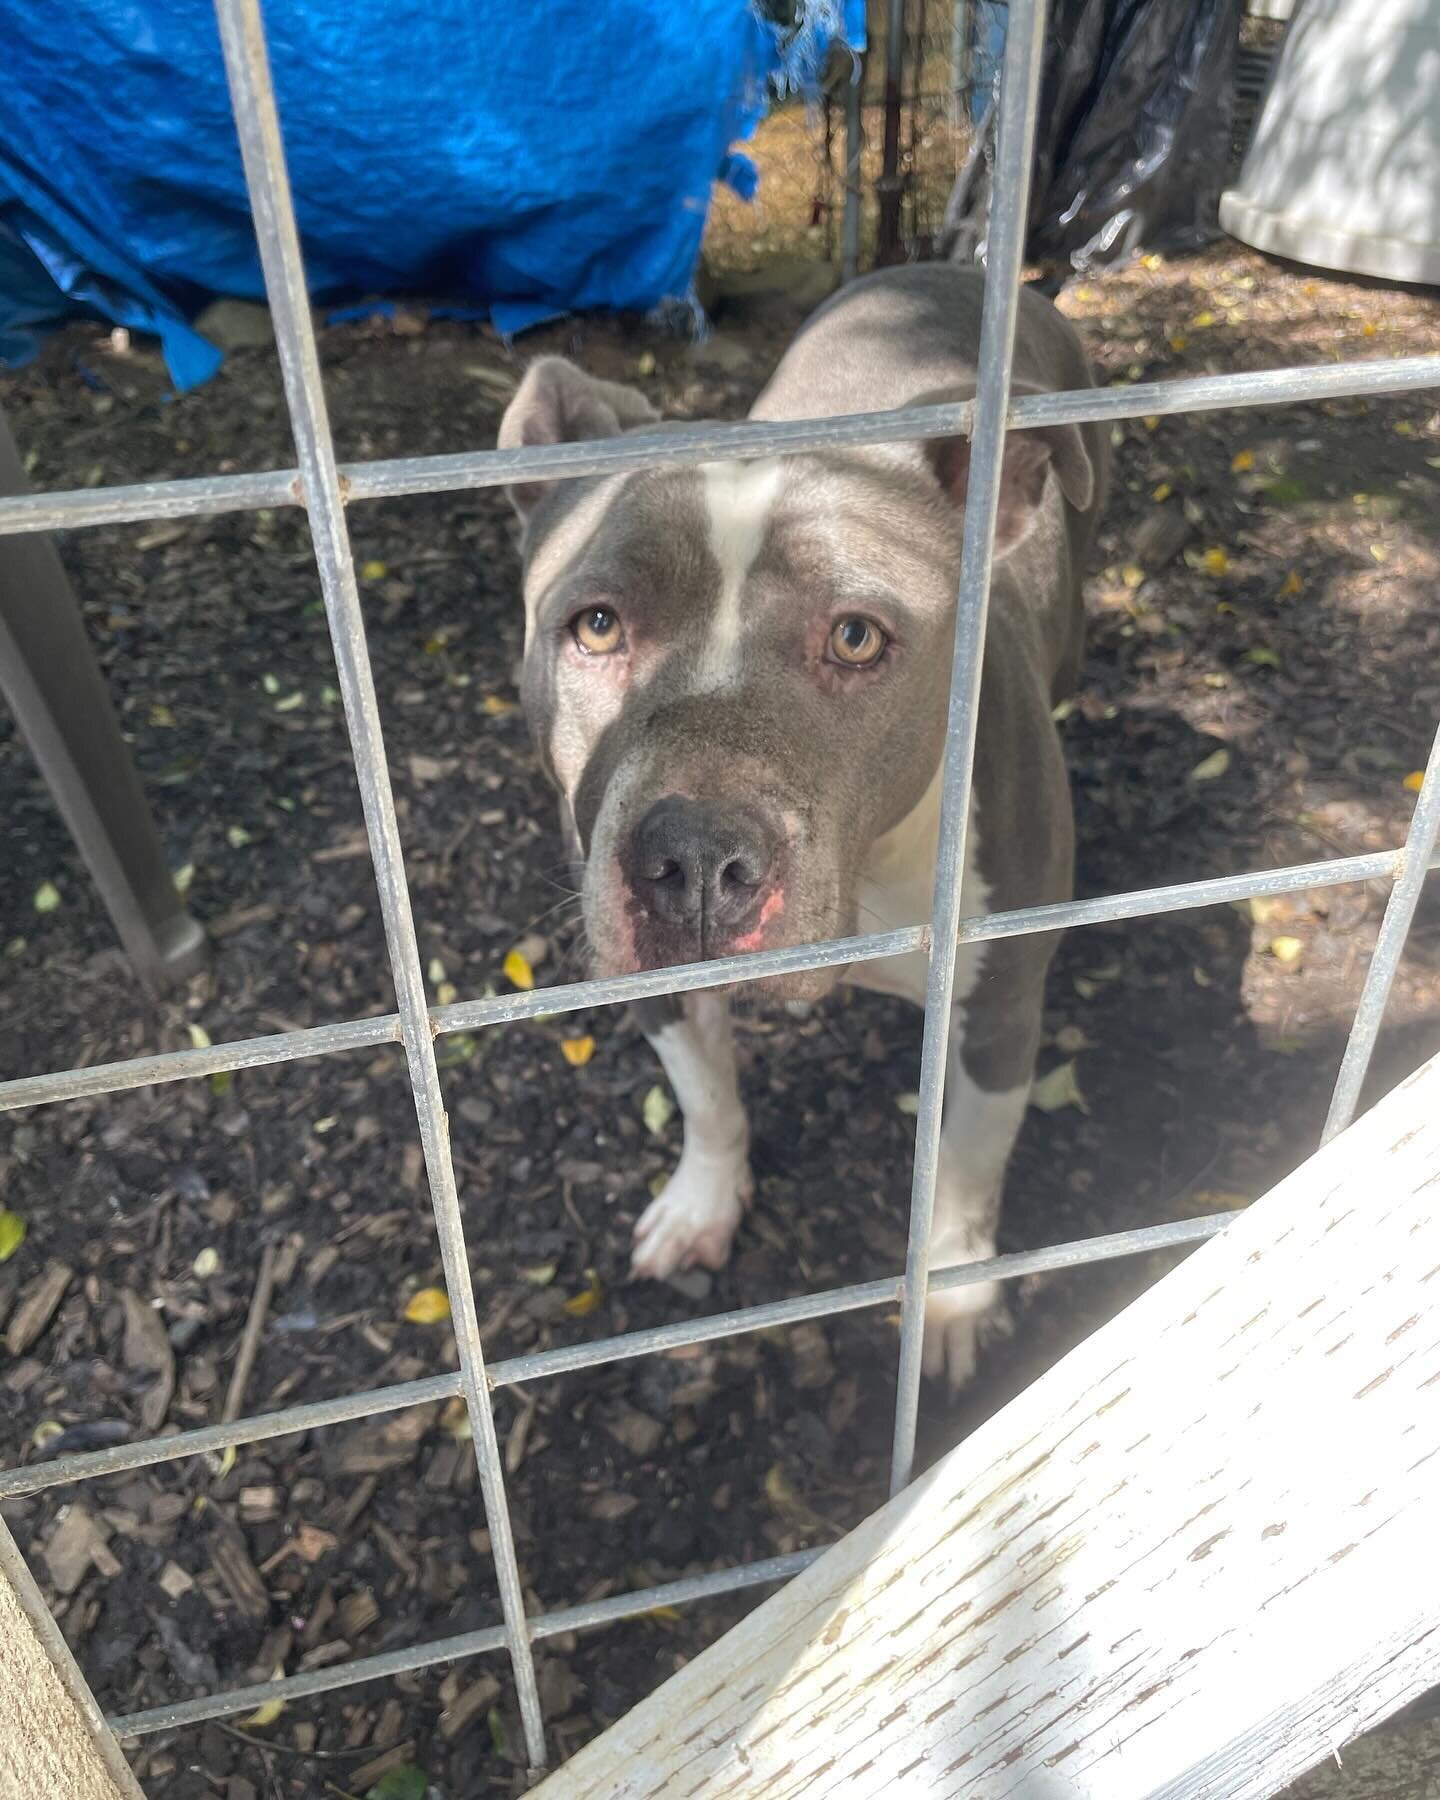 𝗨𝗥𝗚𝗘𝗡𝗧 𝗙𝗢𝗦𝗧𝗘𝗥 𝗦𝗜𝗧𝗨𝗔𝗧𝗜𝗢𝗡: Charlie is a male, very friendly, pittie mix but we don&rsquo;t know much about his background. It&rsquo;s heartbreaking to see a sweet dog like Charlie in need, but thanks to a good samaritan, he&rsquo;s